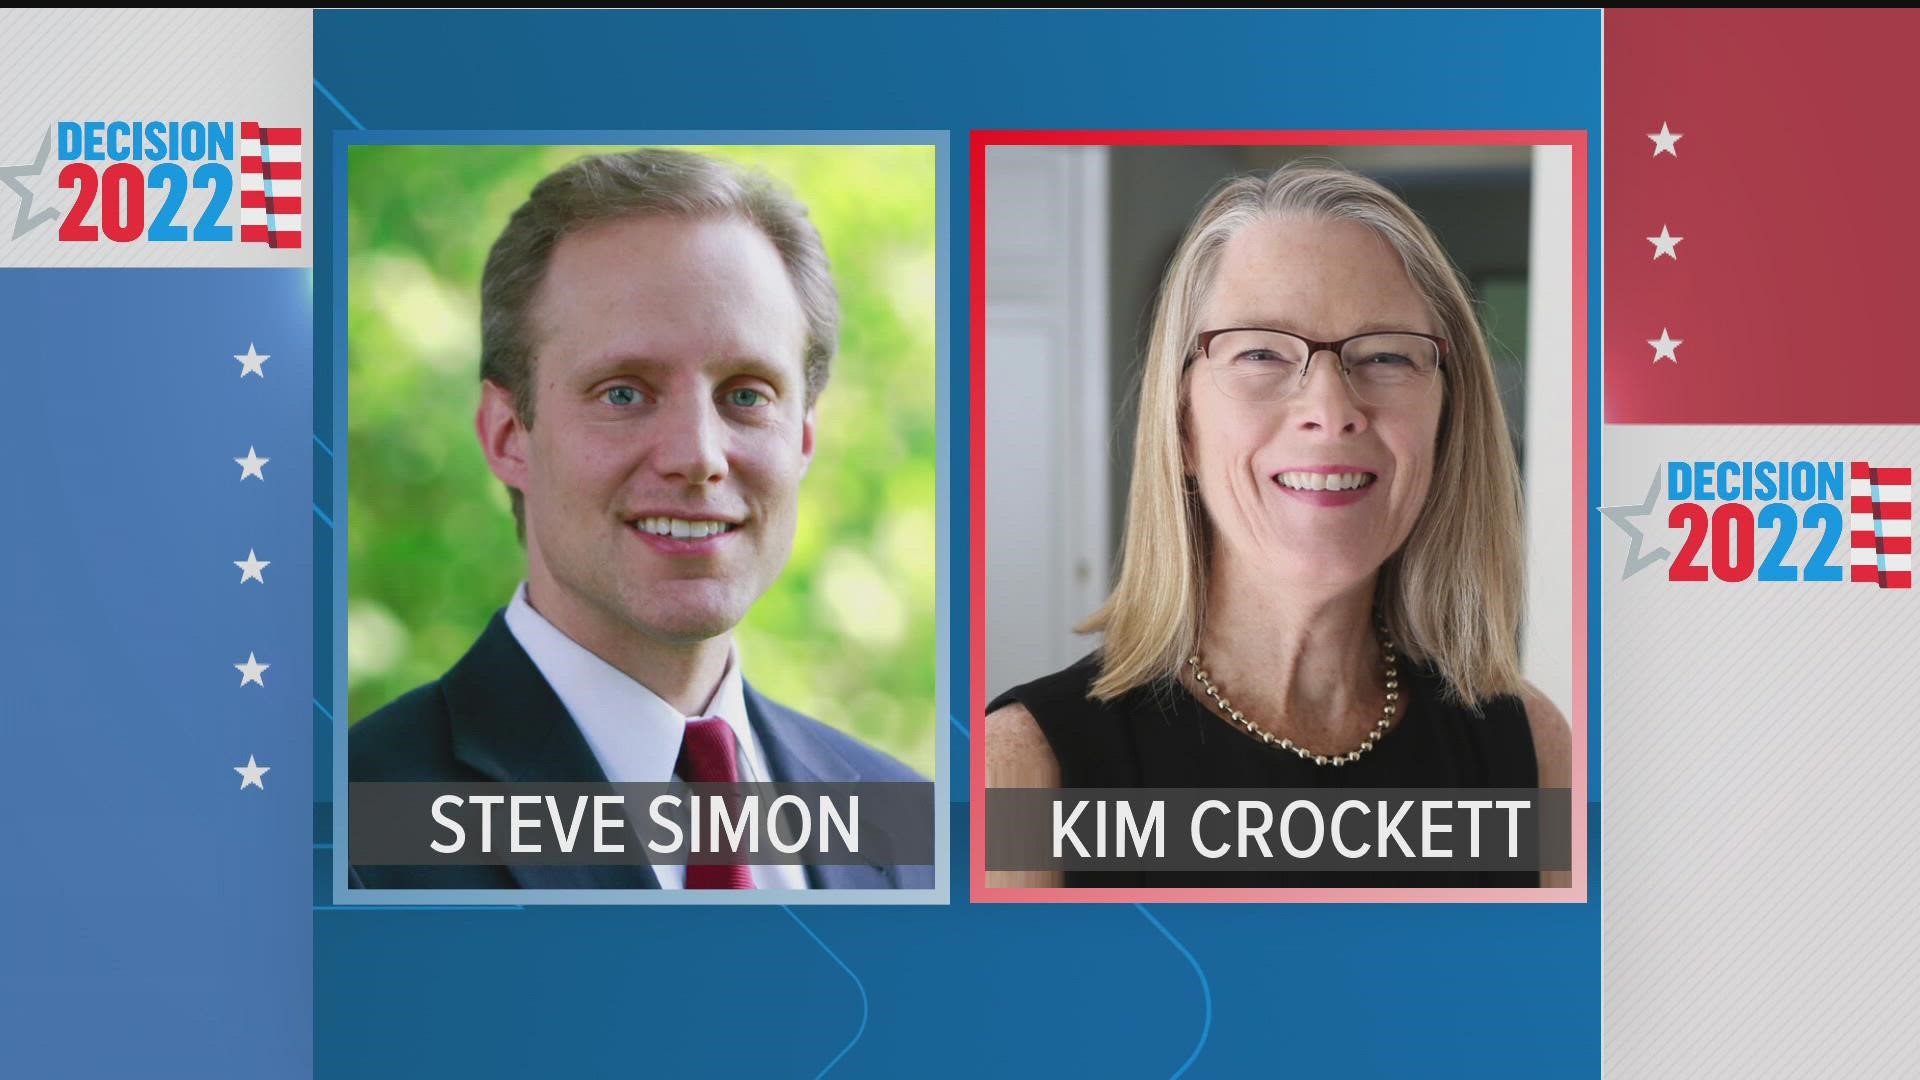 The 2022 election still weighs heavily on the race for Secretary of State between incumbent Democrat Steve Simon and Republican challenger Kim Crockett.